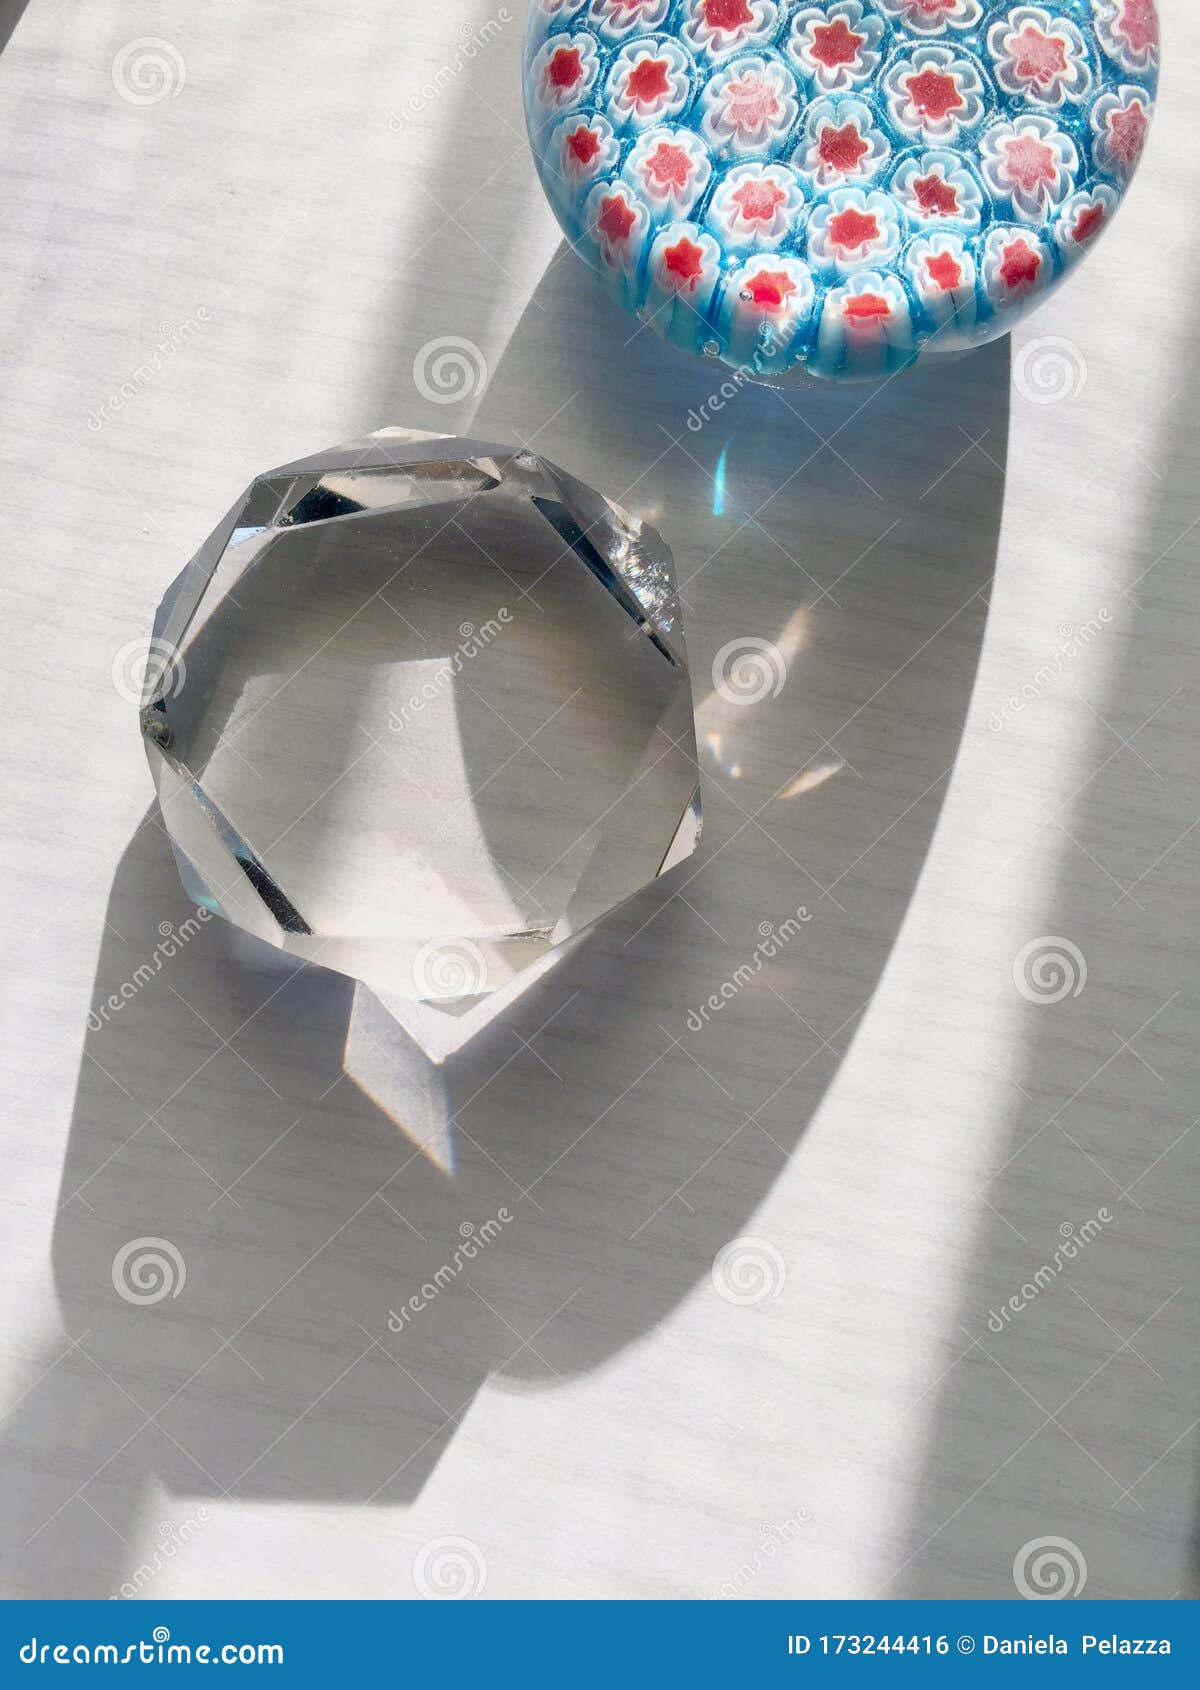 glasses paperweights with shadows